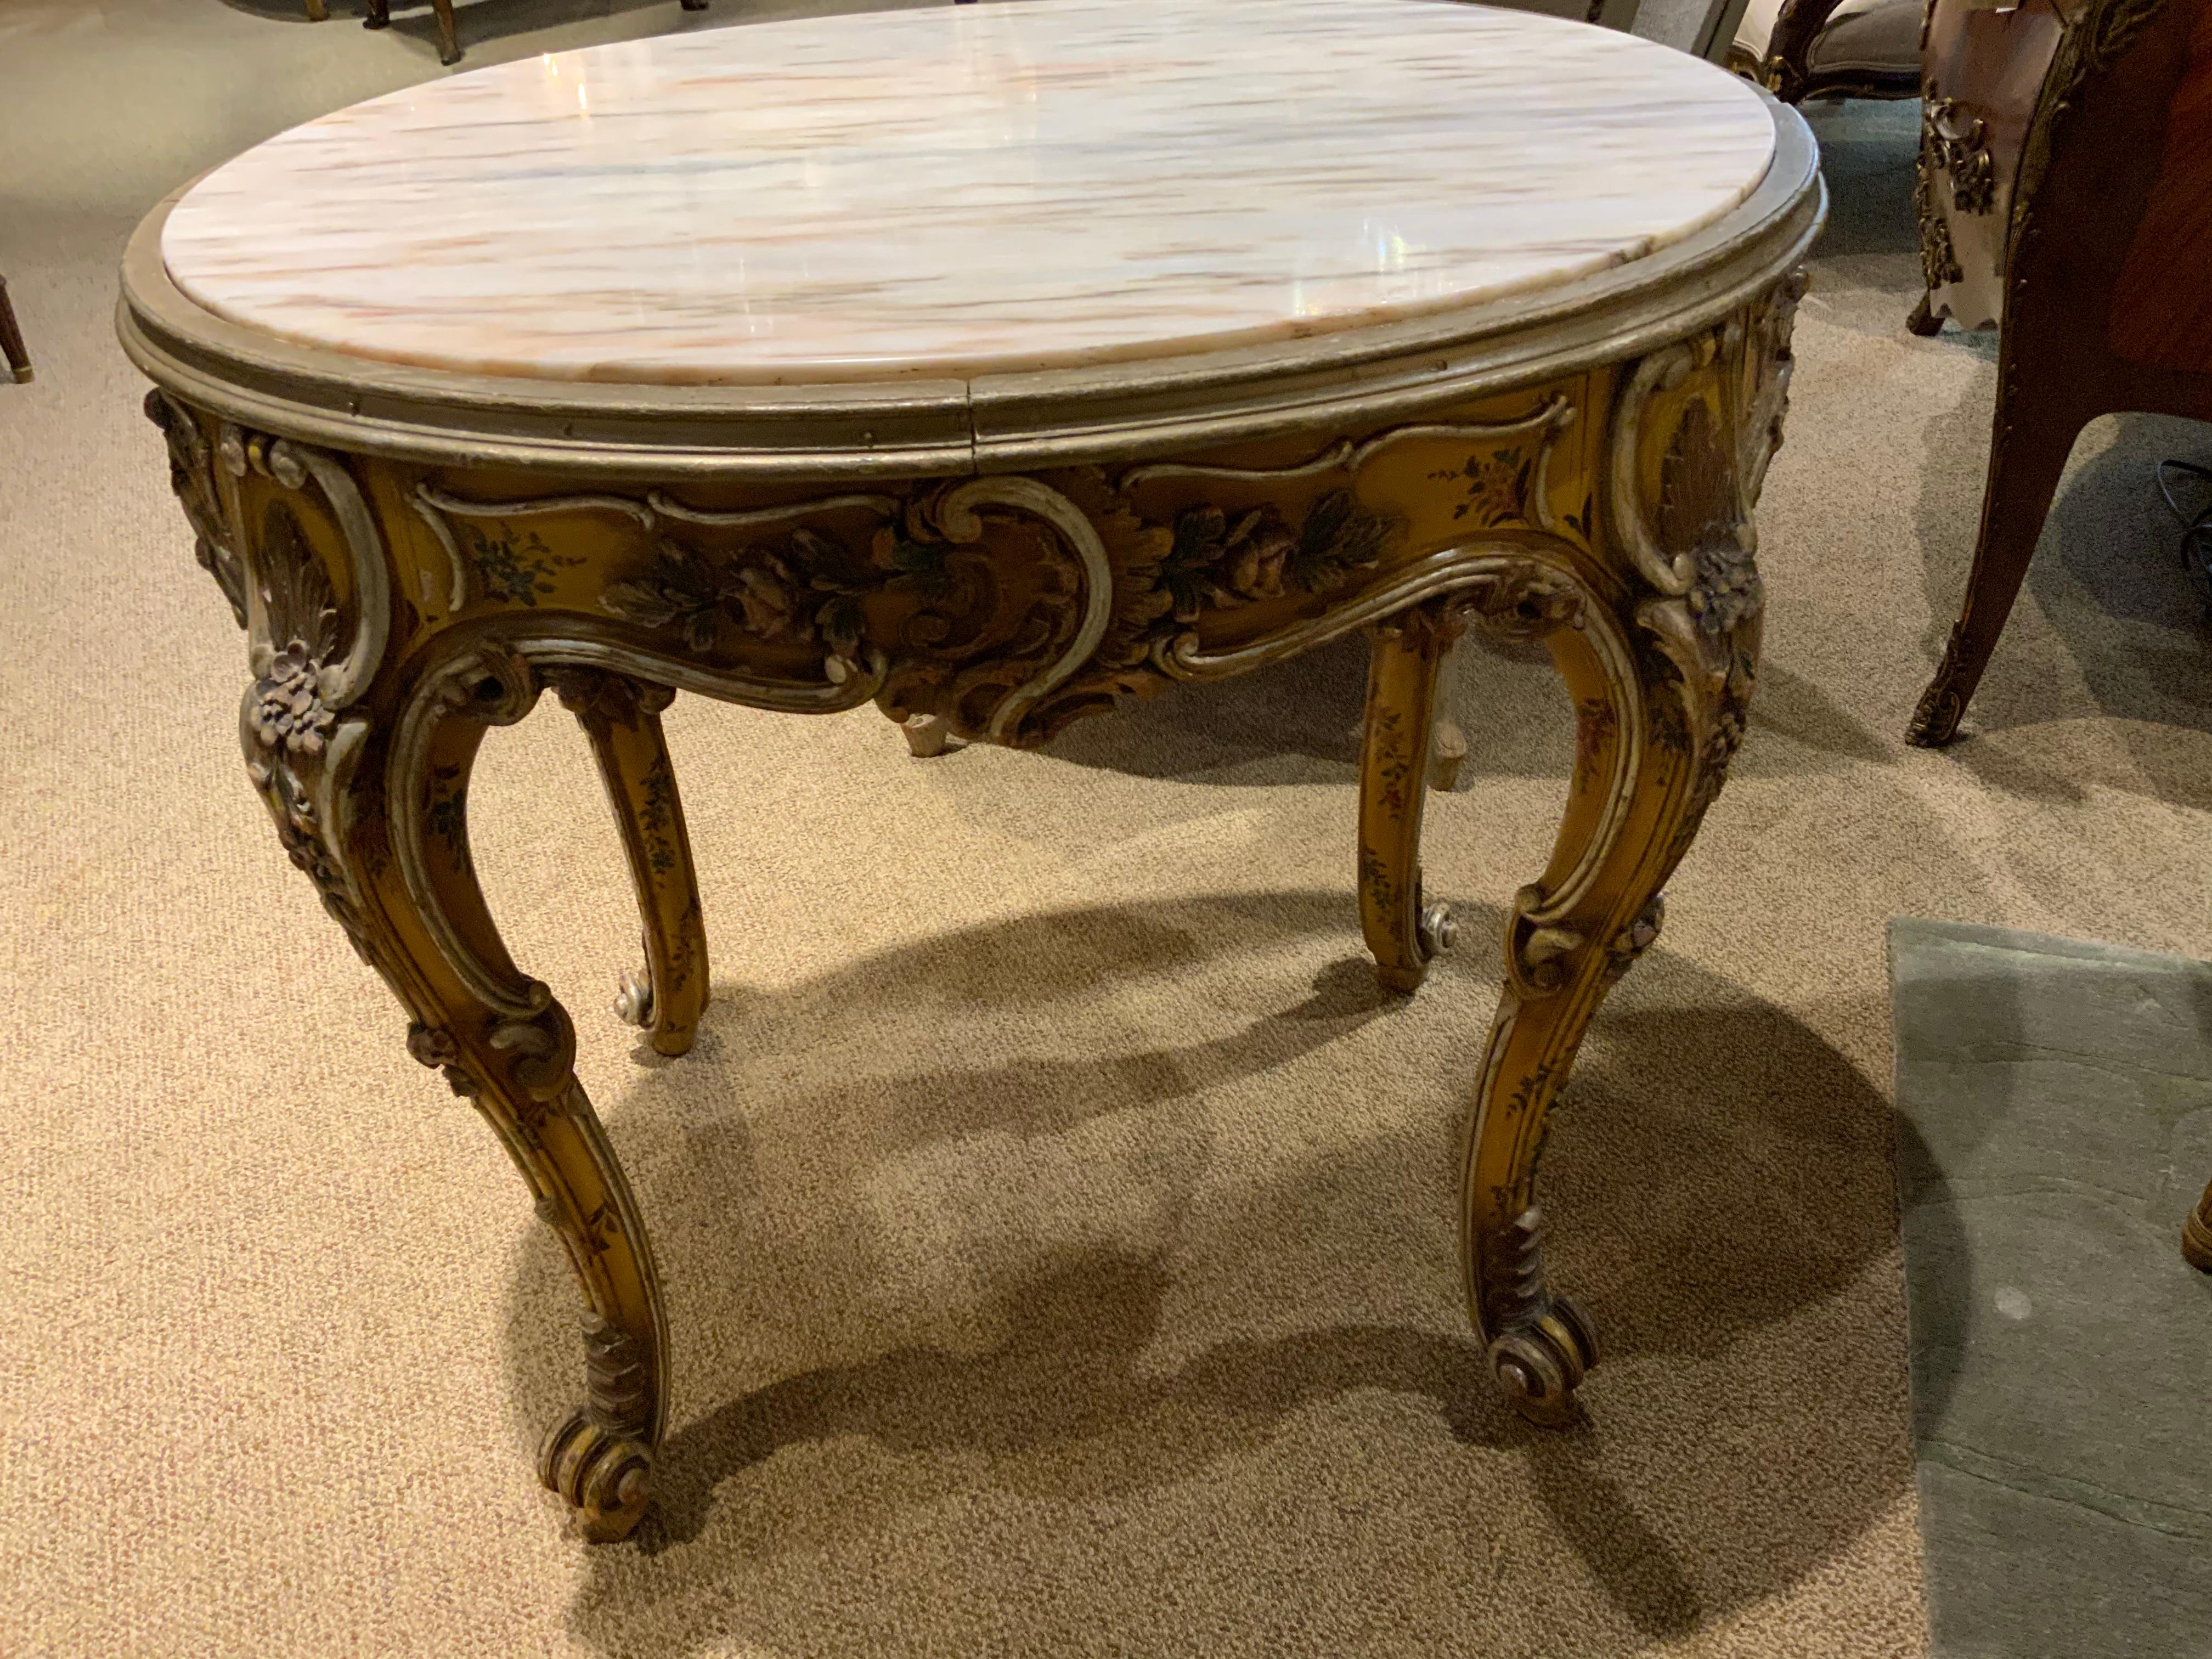 Louis XV Oval Venetian Carved and Polychrome Table with a Cream, Gold and Pale Gray Veins For Sale